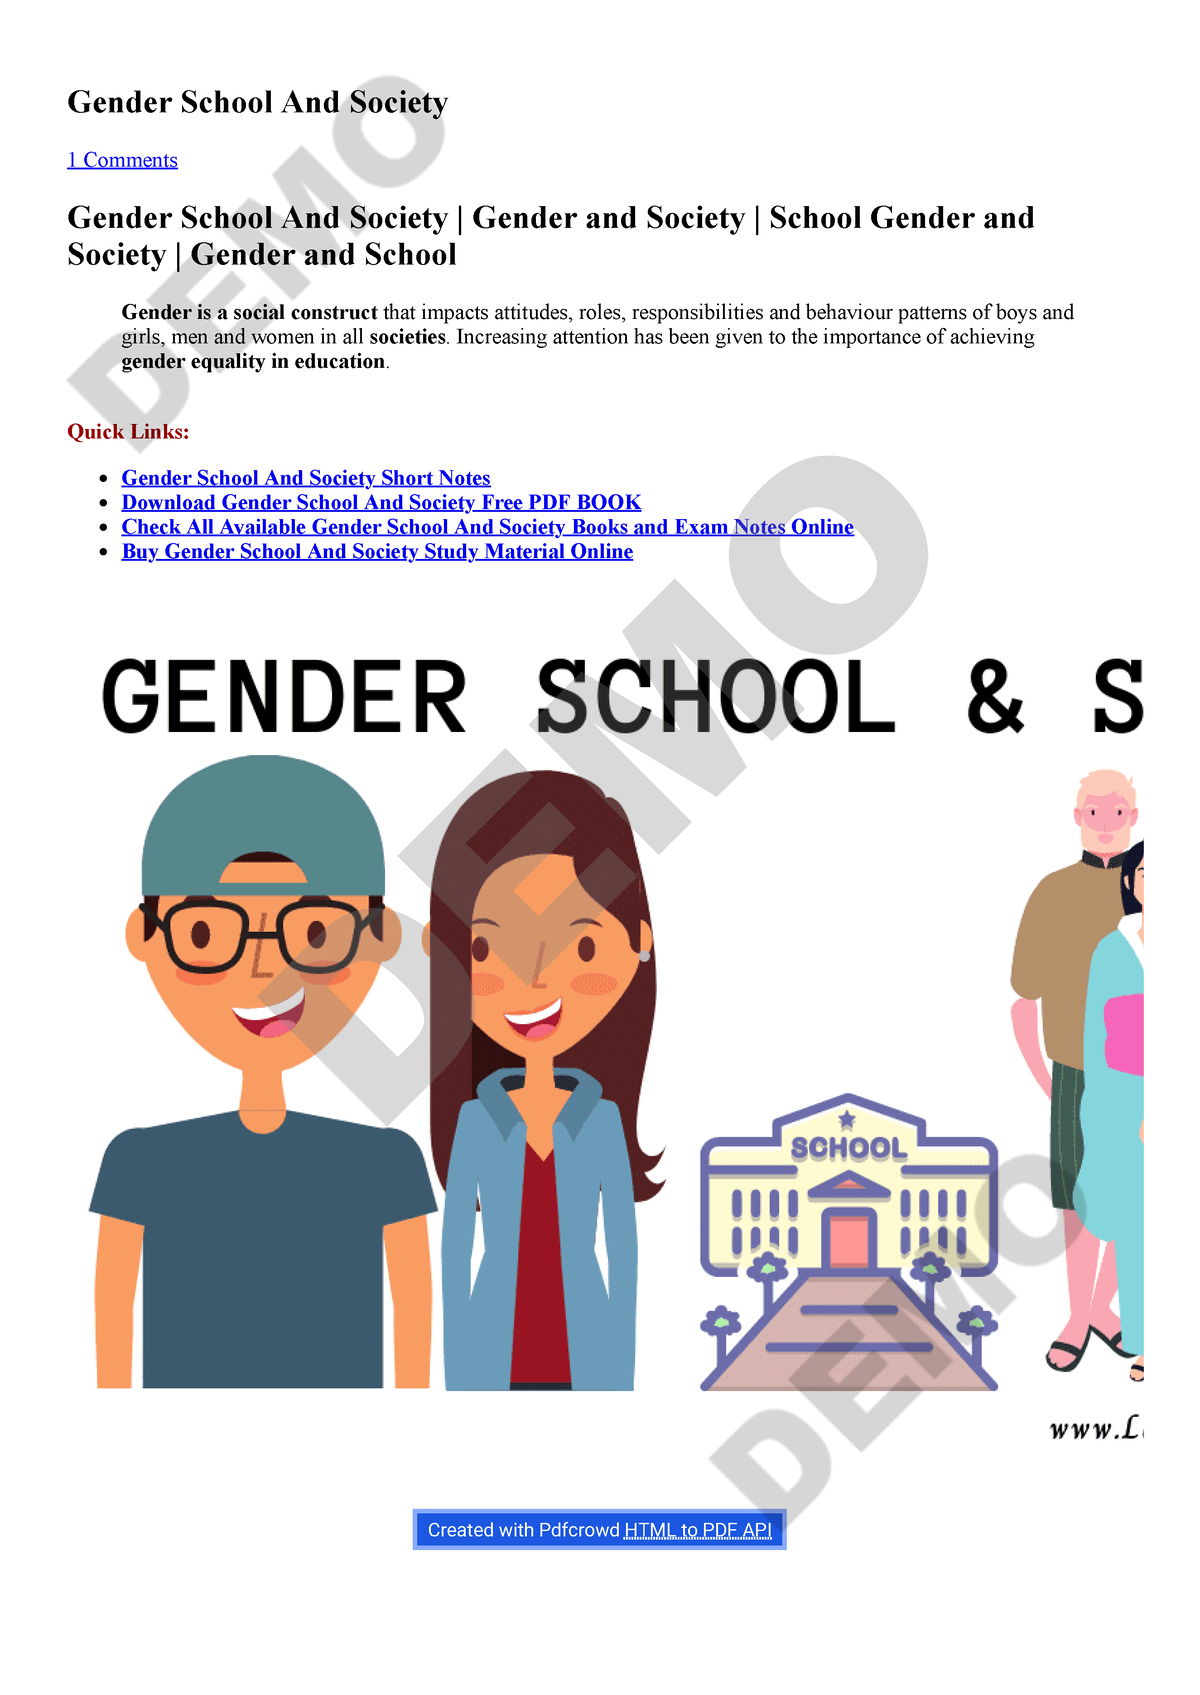 assignment on gender school and society